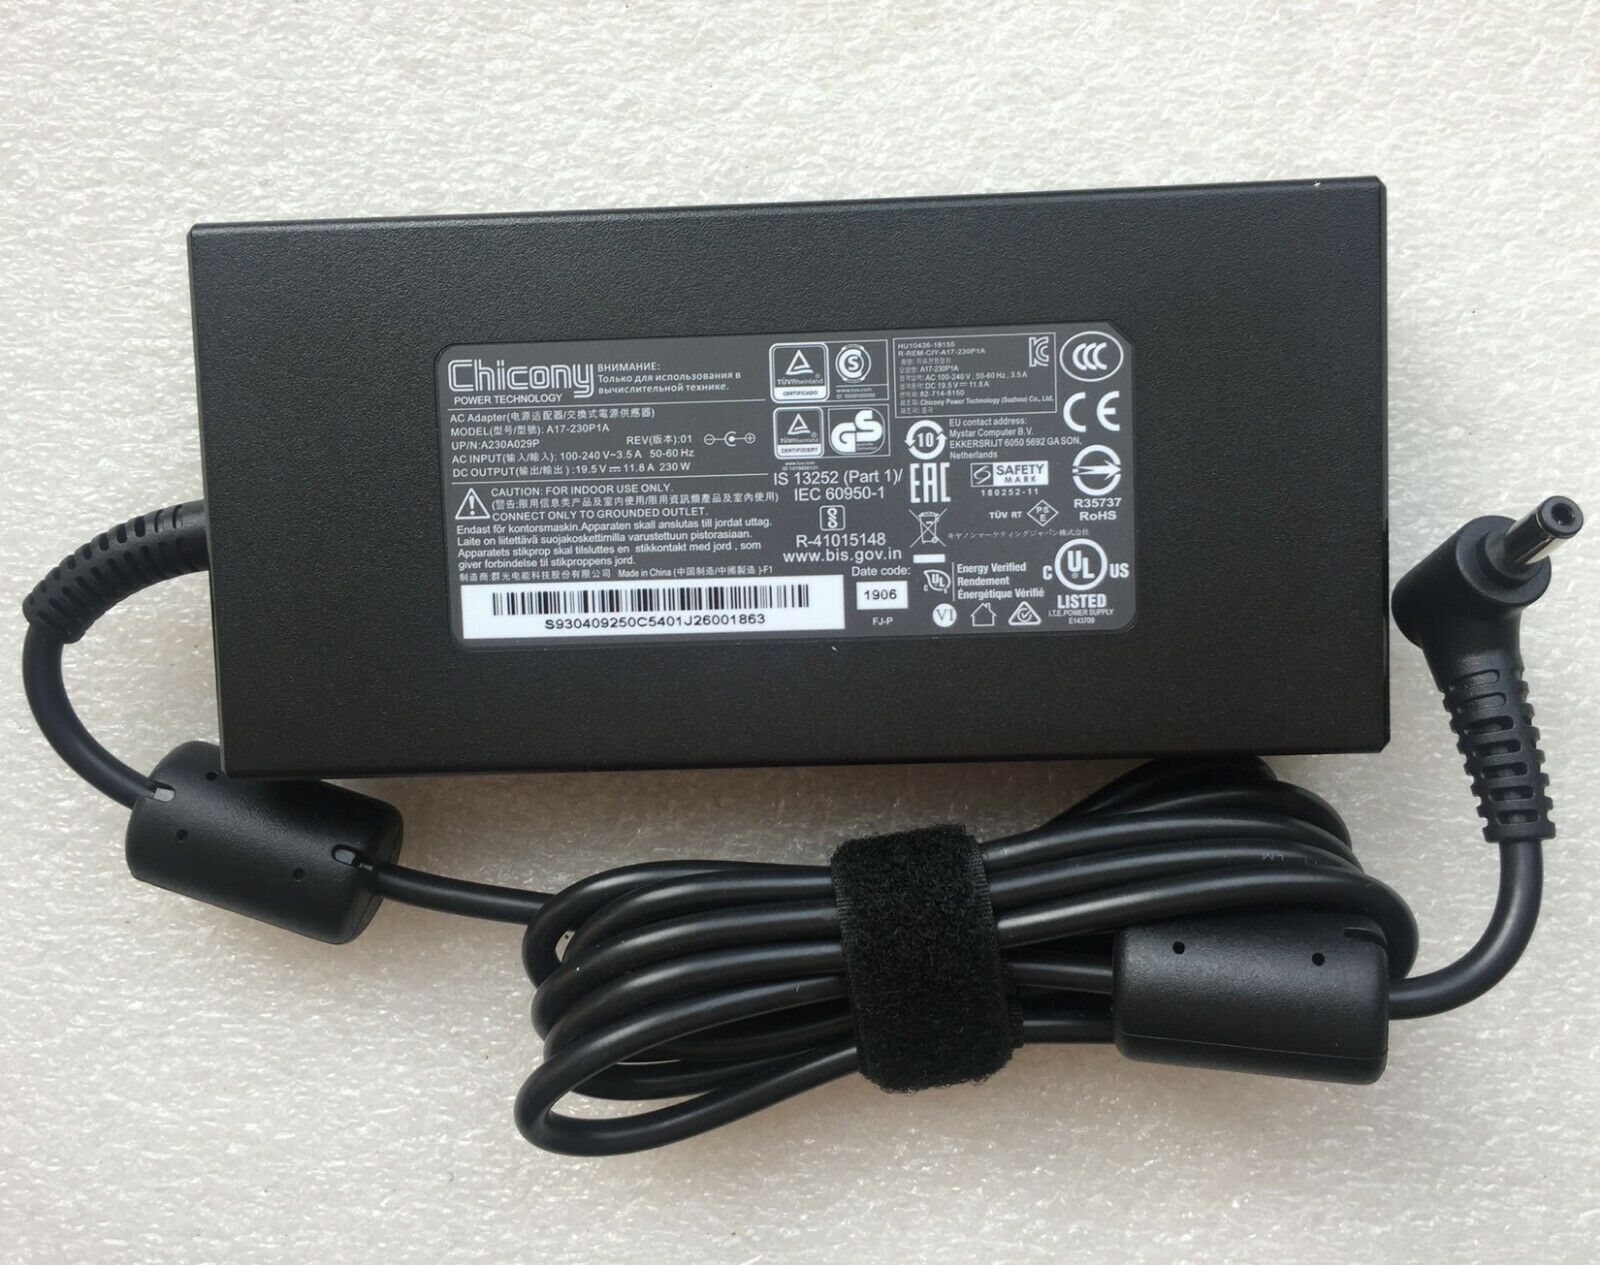 New Original OEM Gigabyte Aero 17 HDR KB KB-8US4130SH AC/DC Adapter Cord/Charger Country/Region of Manufacture: China